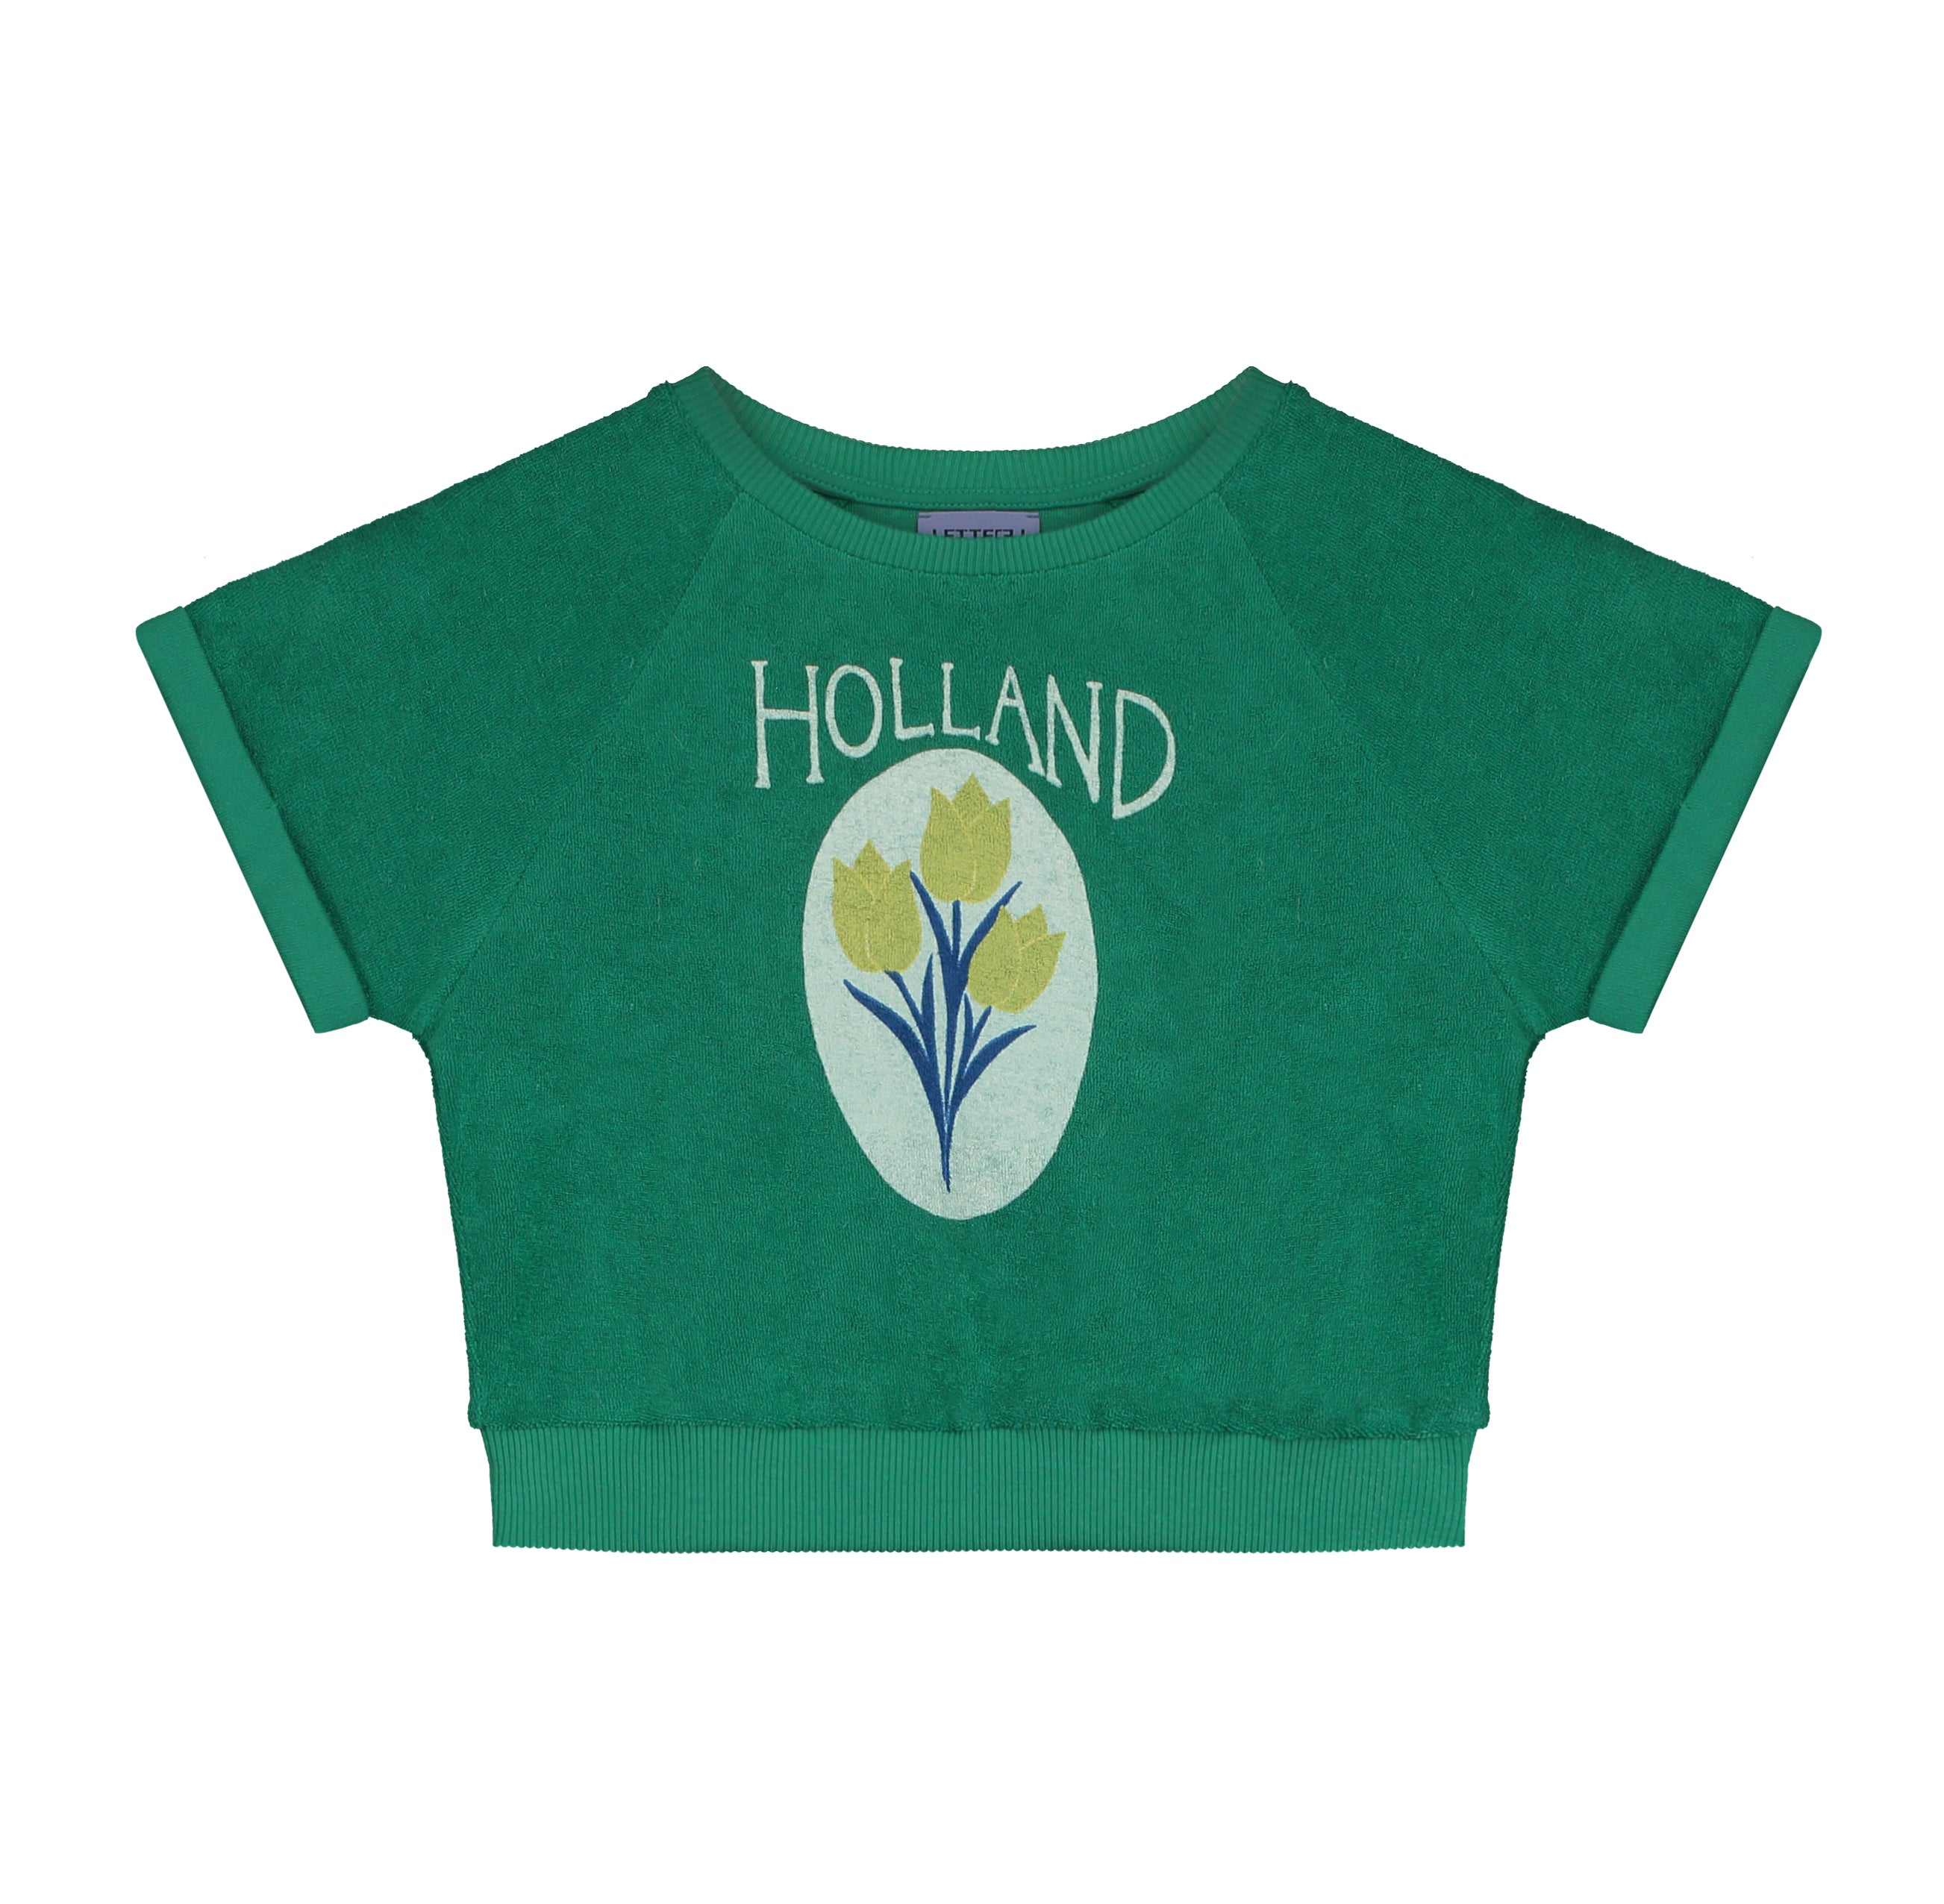 Letter to the World - amsterdam sweater - grass